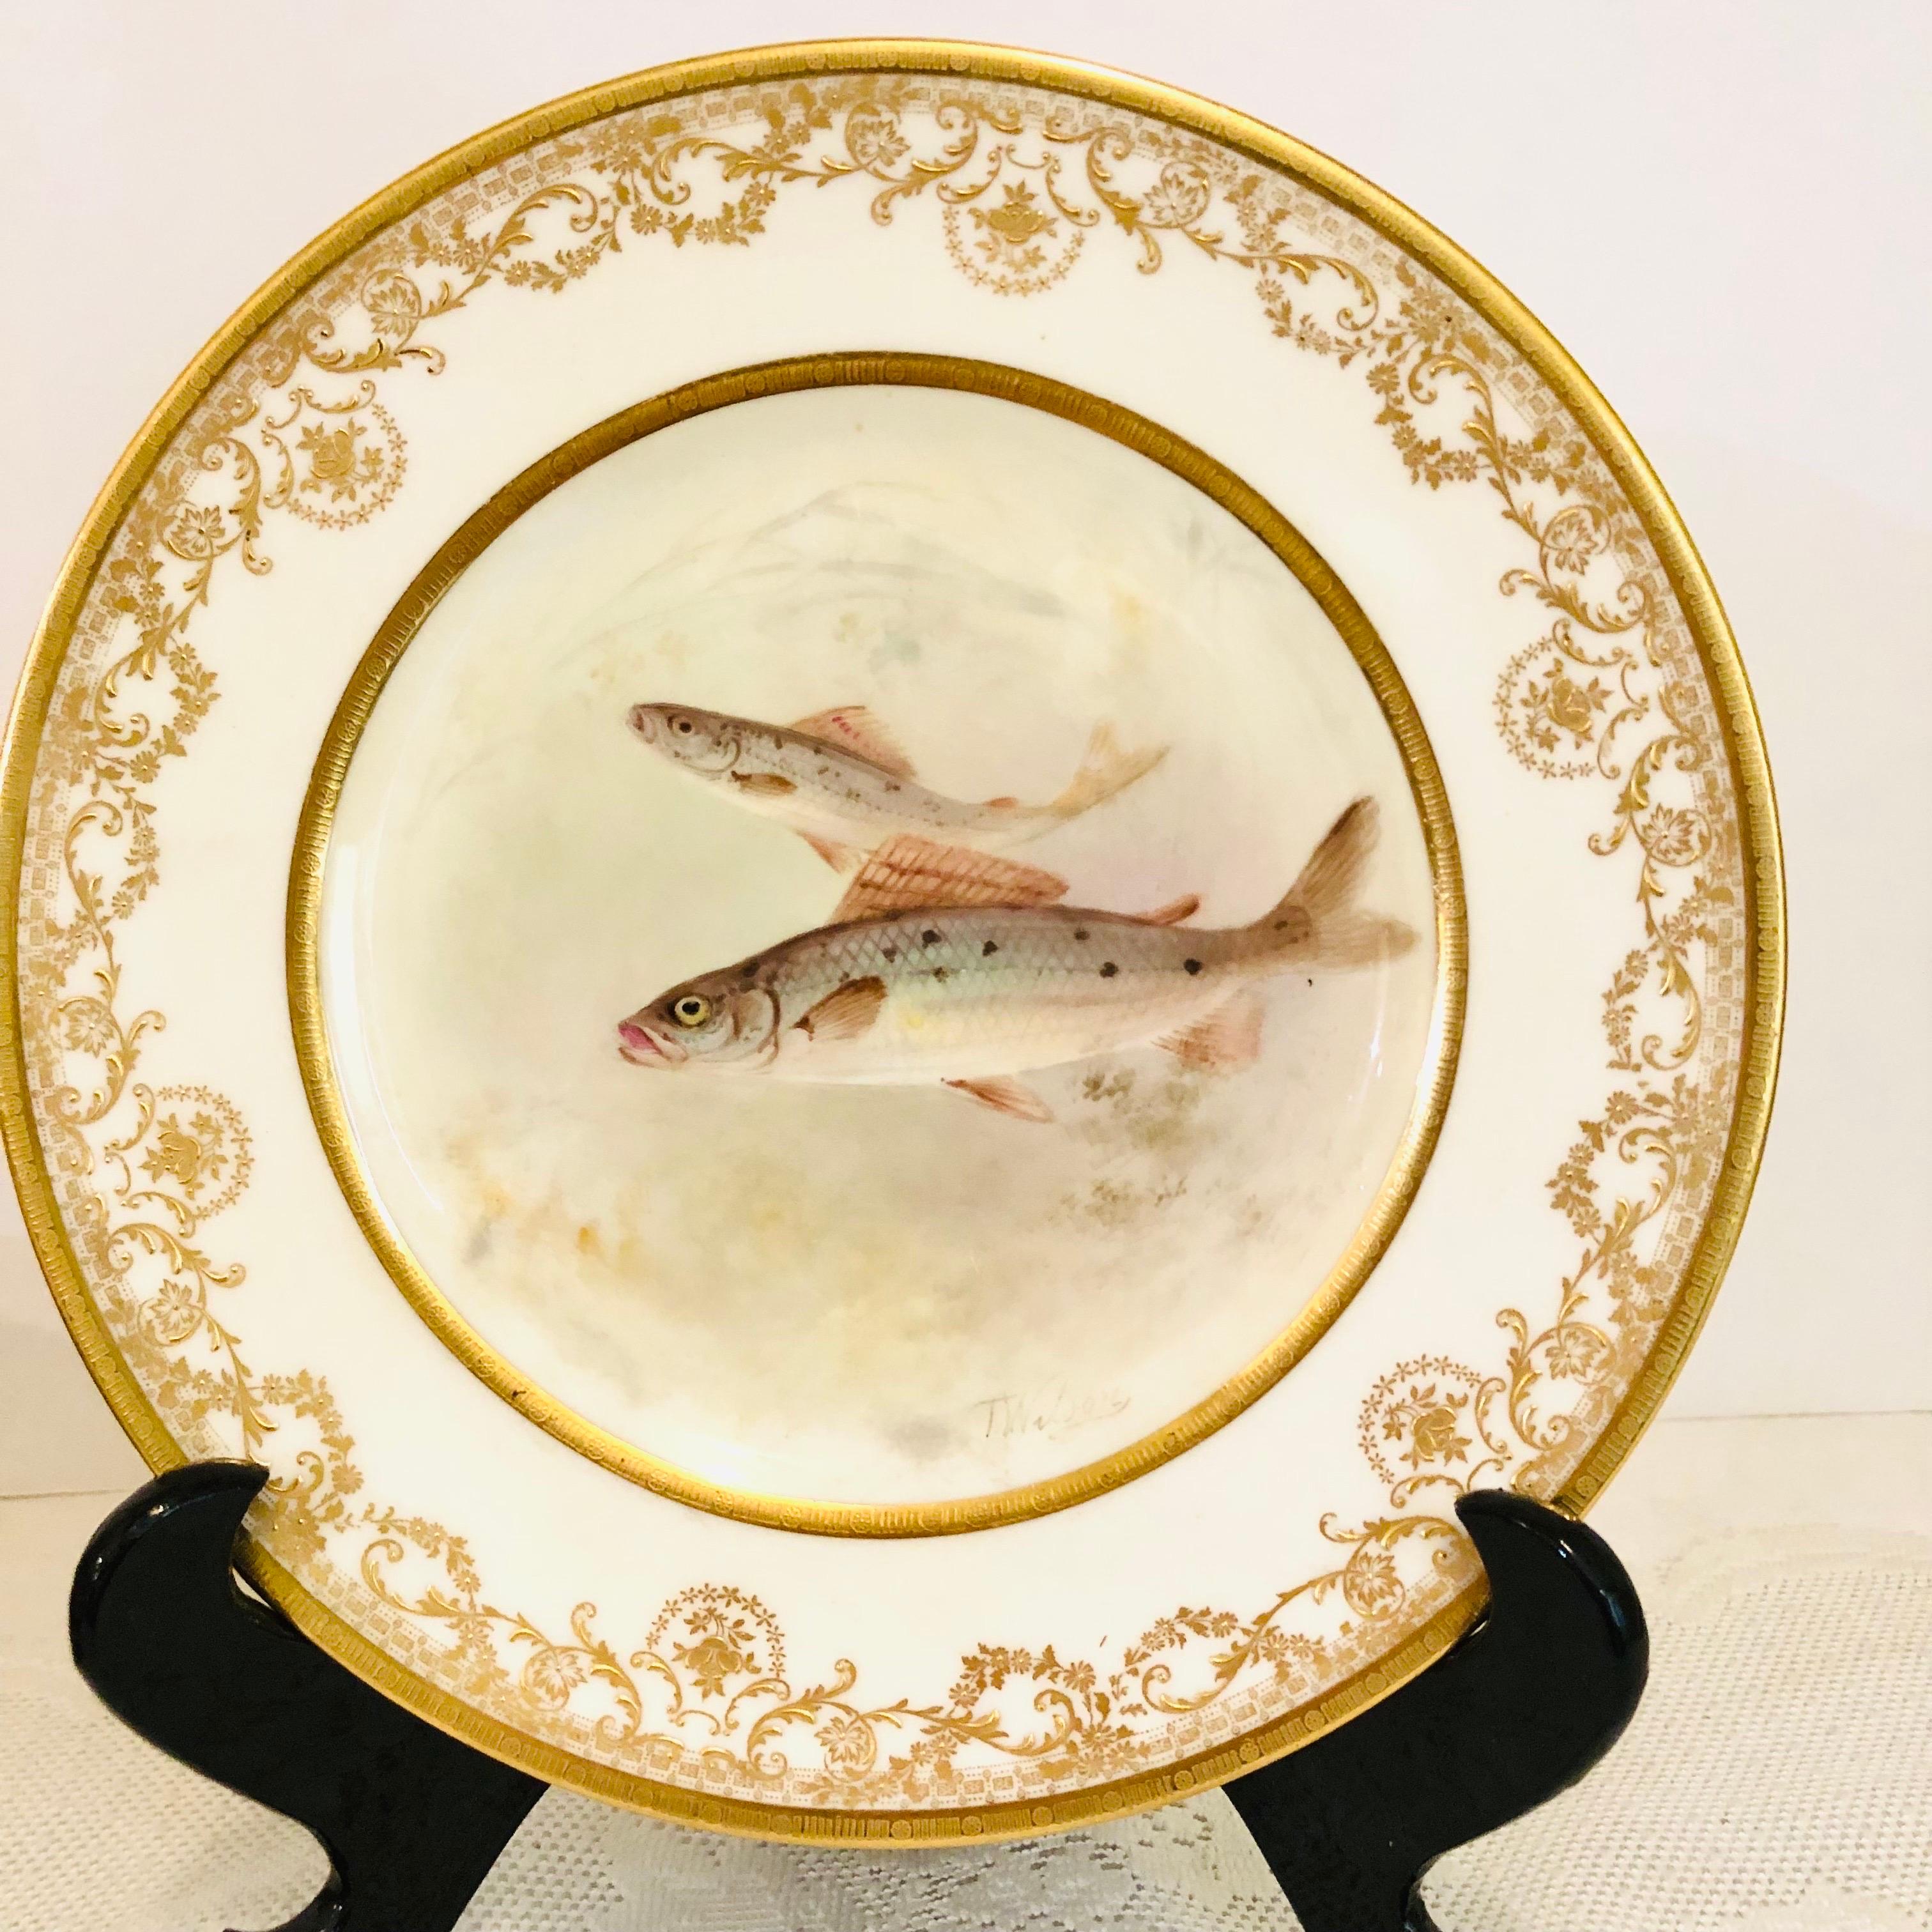 Set of 12 Royal Doulton Fish Plates Each Hand Painted with Different Fish  9